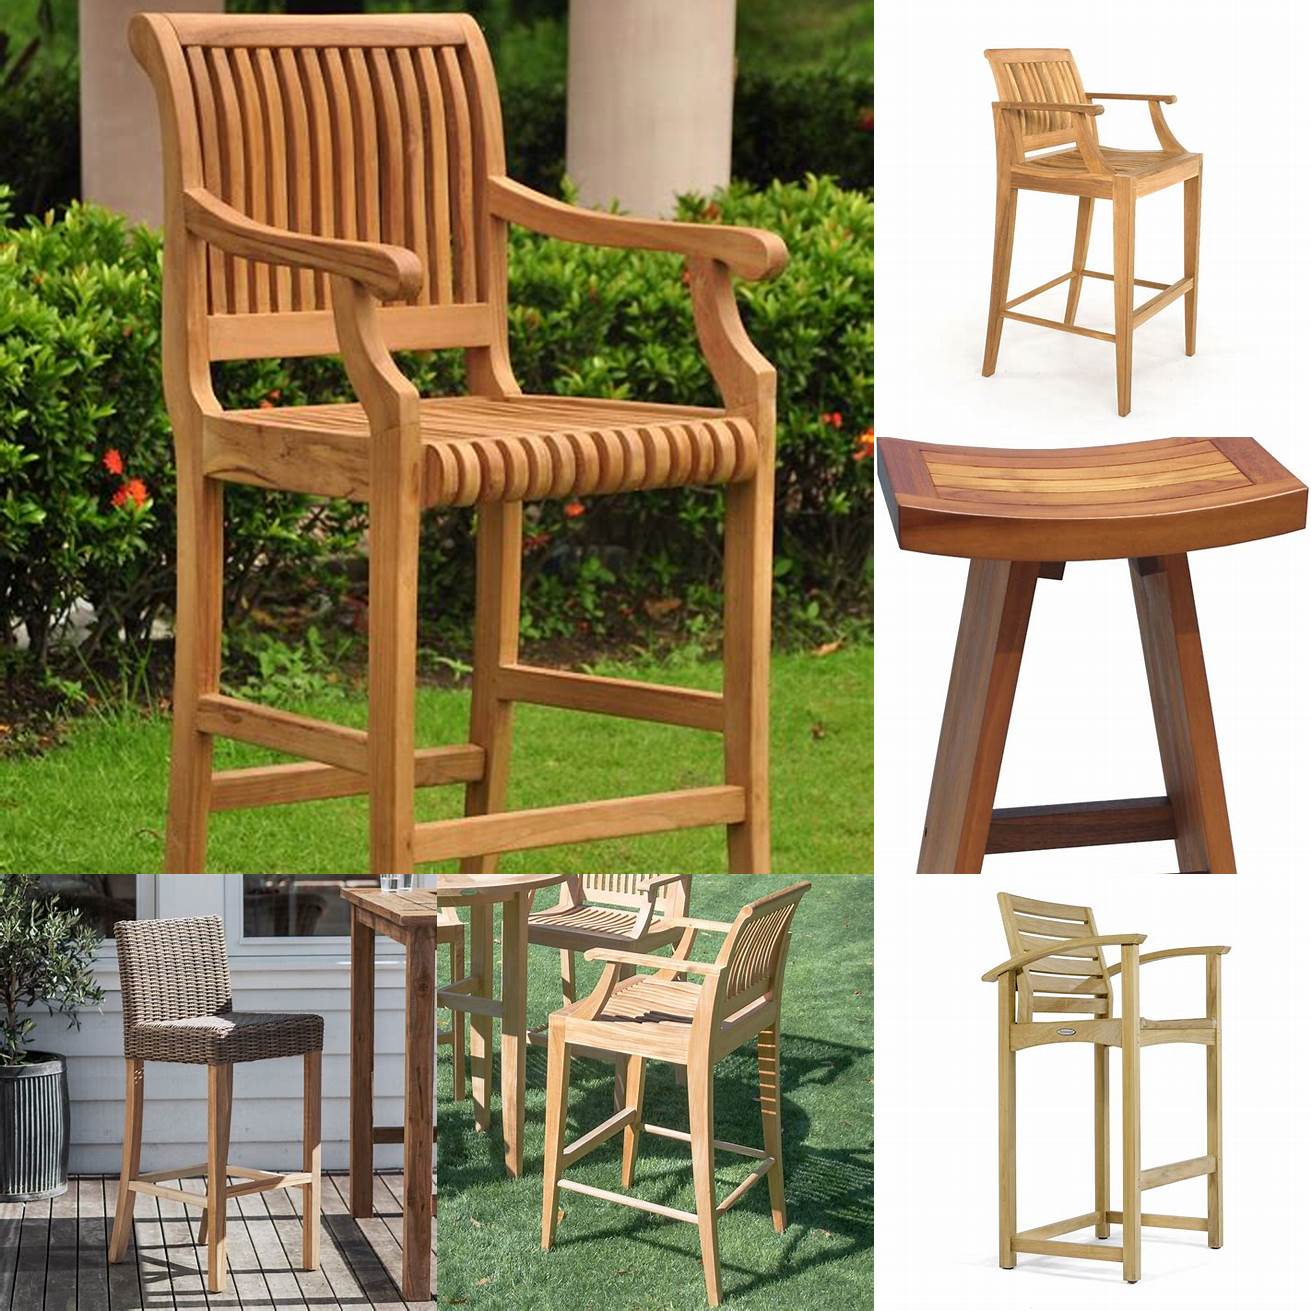 Teak Bar Stools and Chairs